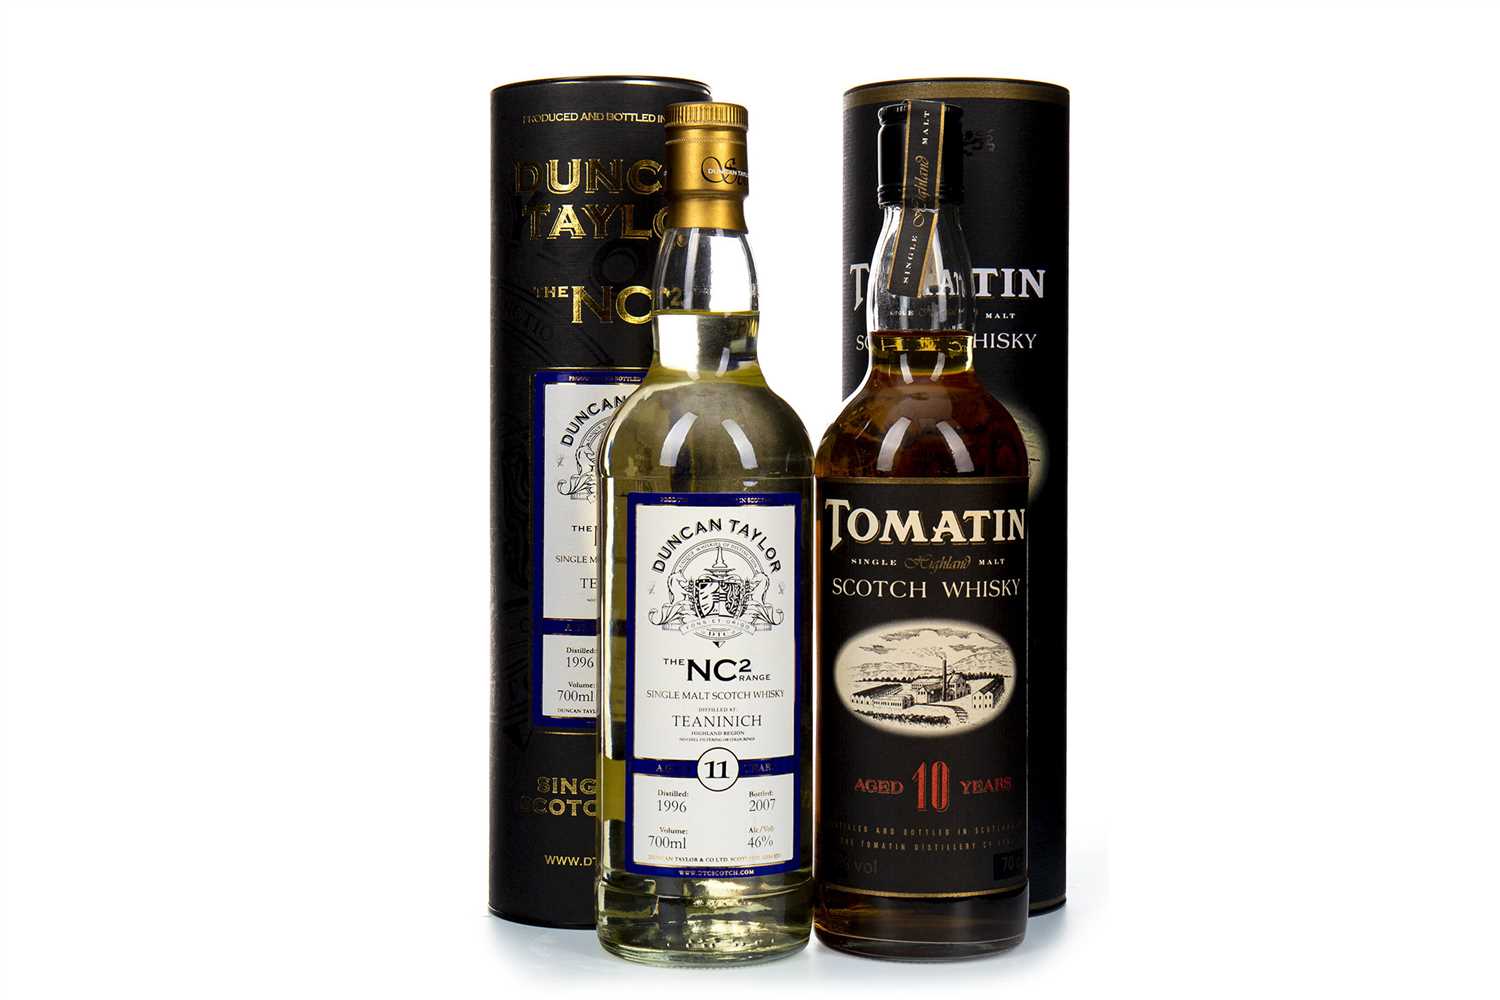 Lot 320 - TEANINICH DUNCAN TAYLOR AGED 11 YEARS AND TOMATIN AGED 10 YEARS